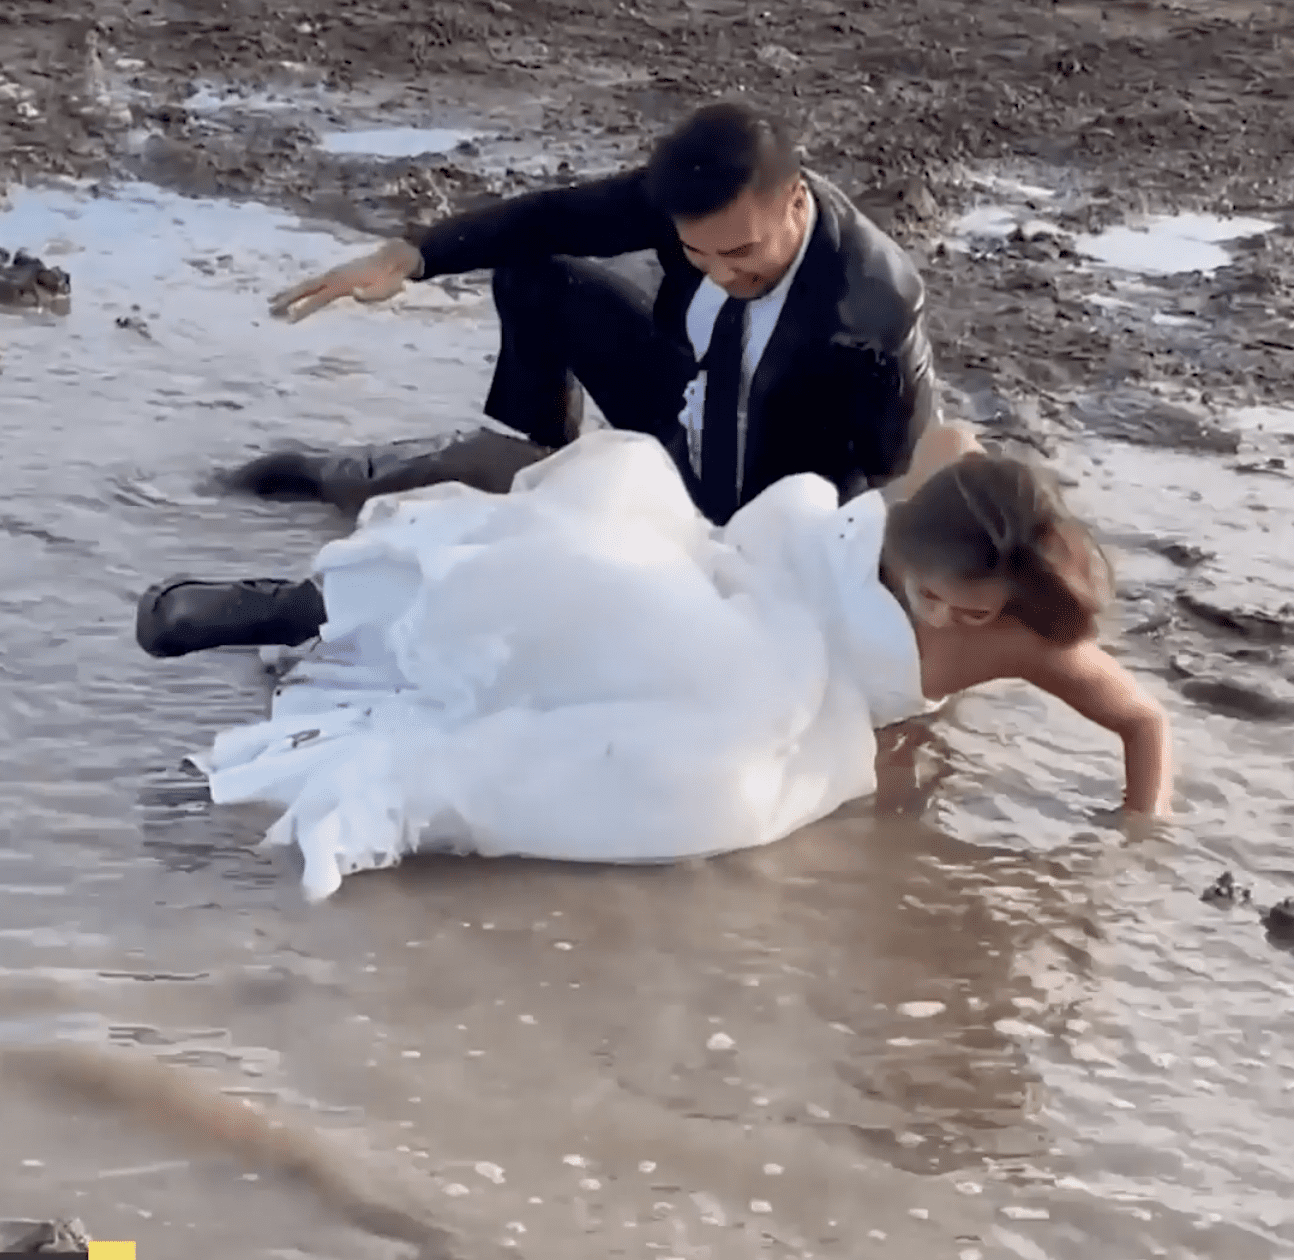 Newlyweds Kamilla and Murat fall in the mud during their wedding photoshoot. | Source: facebook.com/newsflare